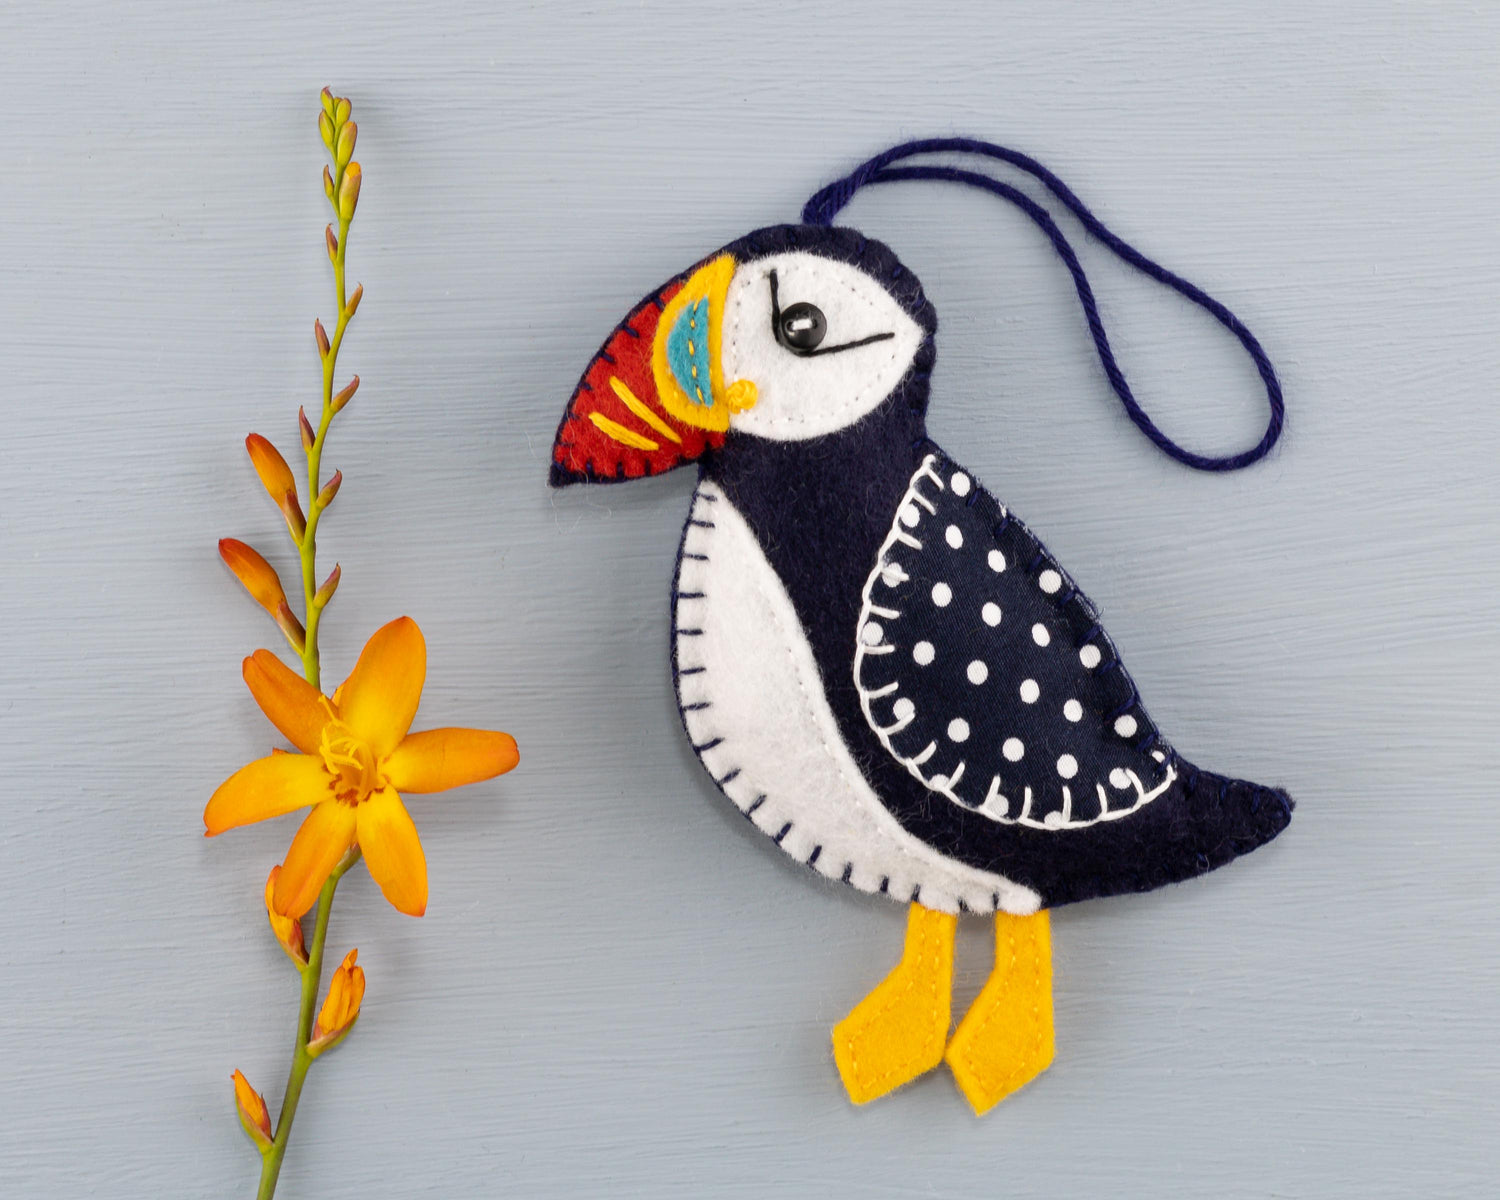 Embroidered Felt Winter Landscape Christmas Ornament – Tilly & Puffin